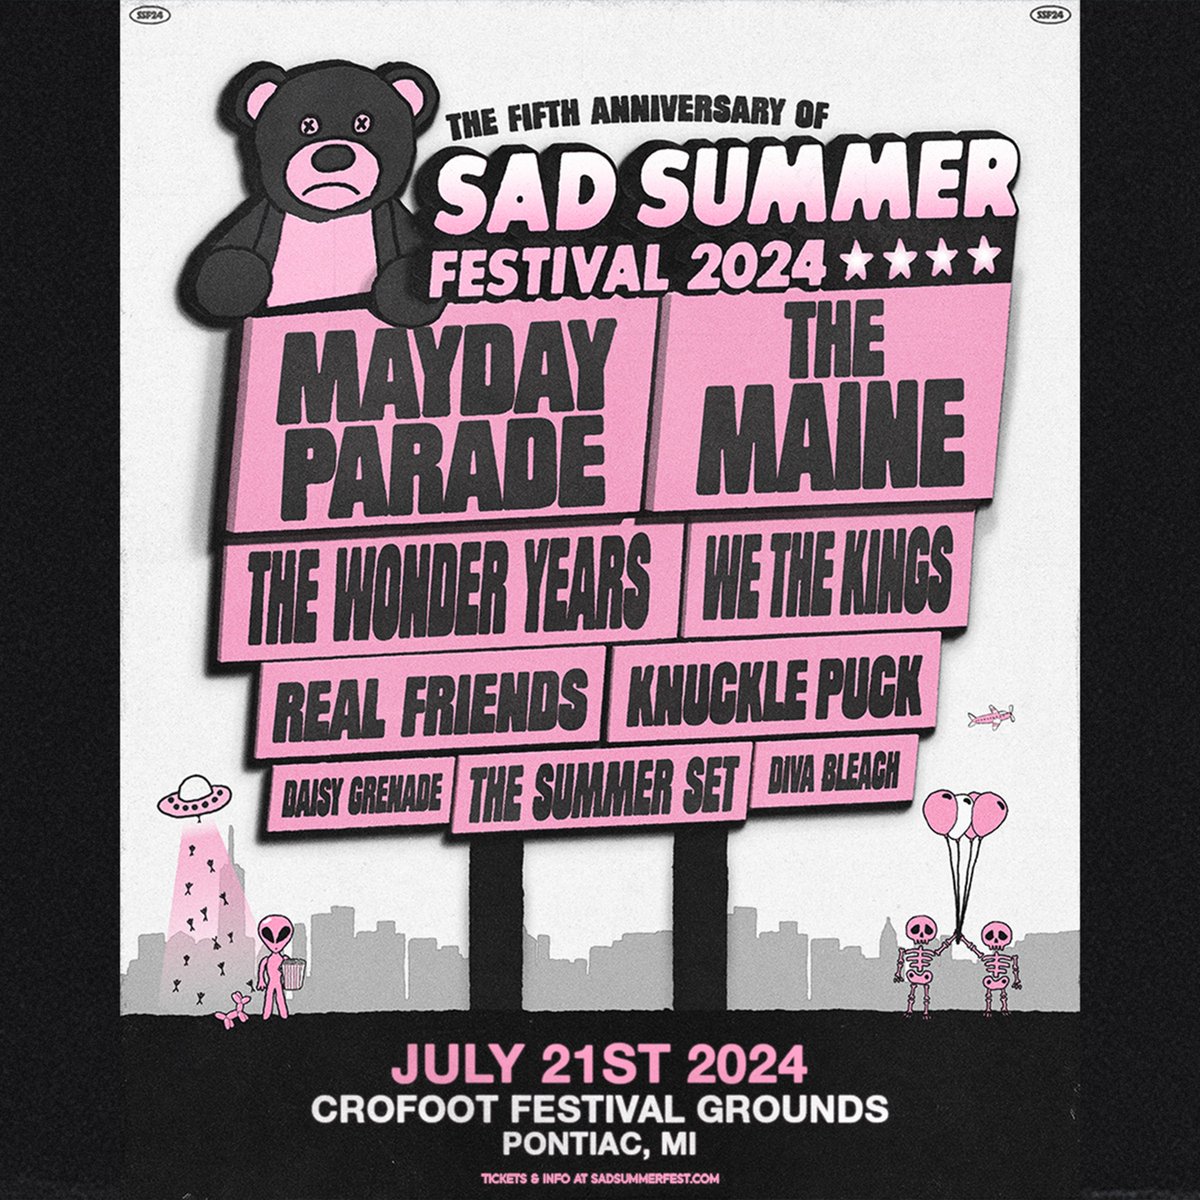 Celebrate the 5th anniversary of @sadsummerfest this July at @TheCrofoot Festival Grounds! Grab your tickets now to catch @WeTheKings, @daisygrenade, @maydayparade and more live! 🎟️: bit.ly/3Jr0rQ7